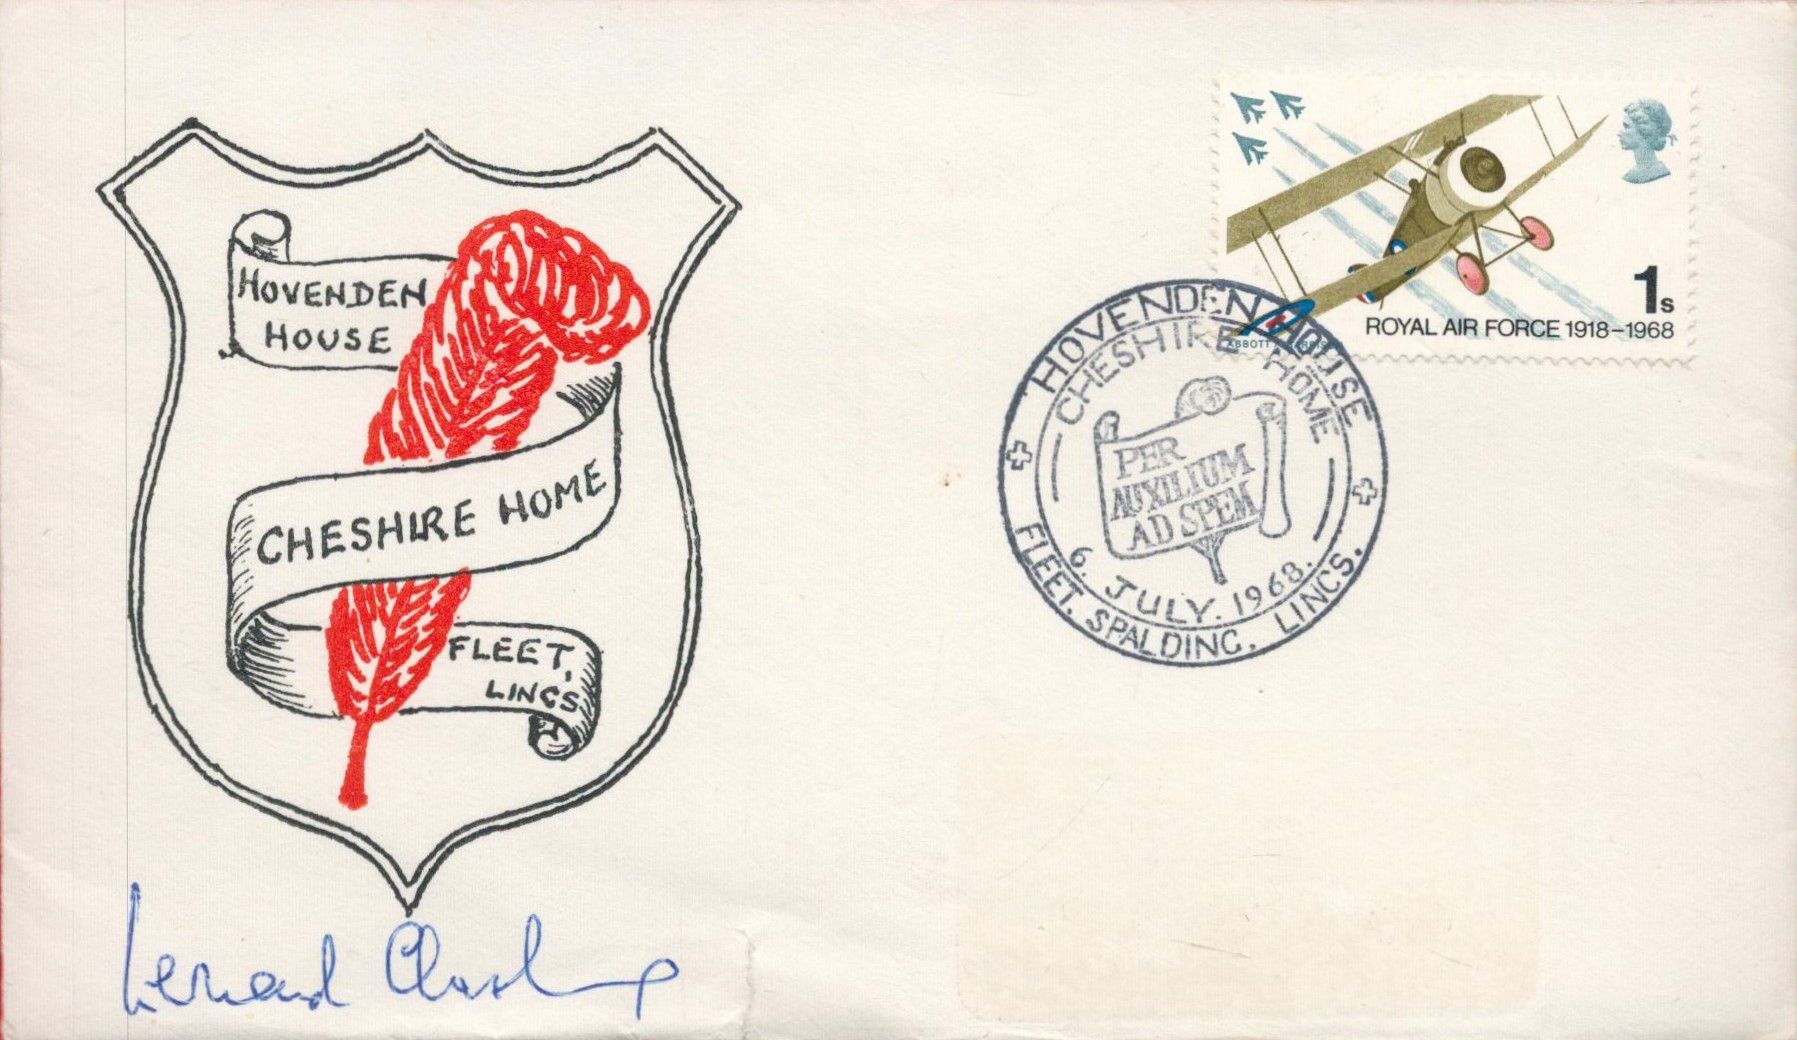 WW2 Group Captain Leonard Cheshire Personally Signed Hovenden House FDC with RAF Stamp and 6 July